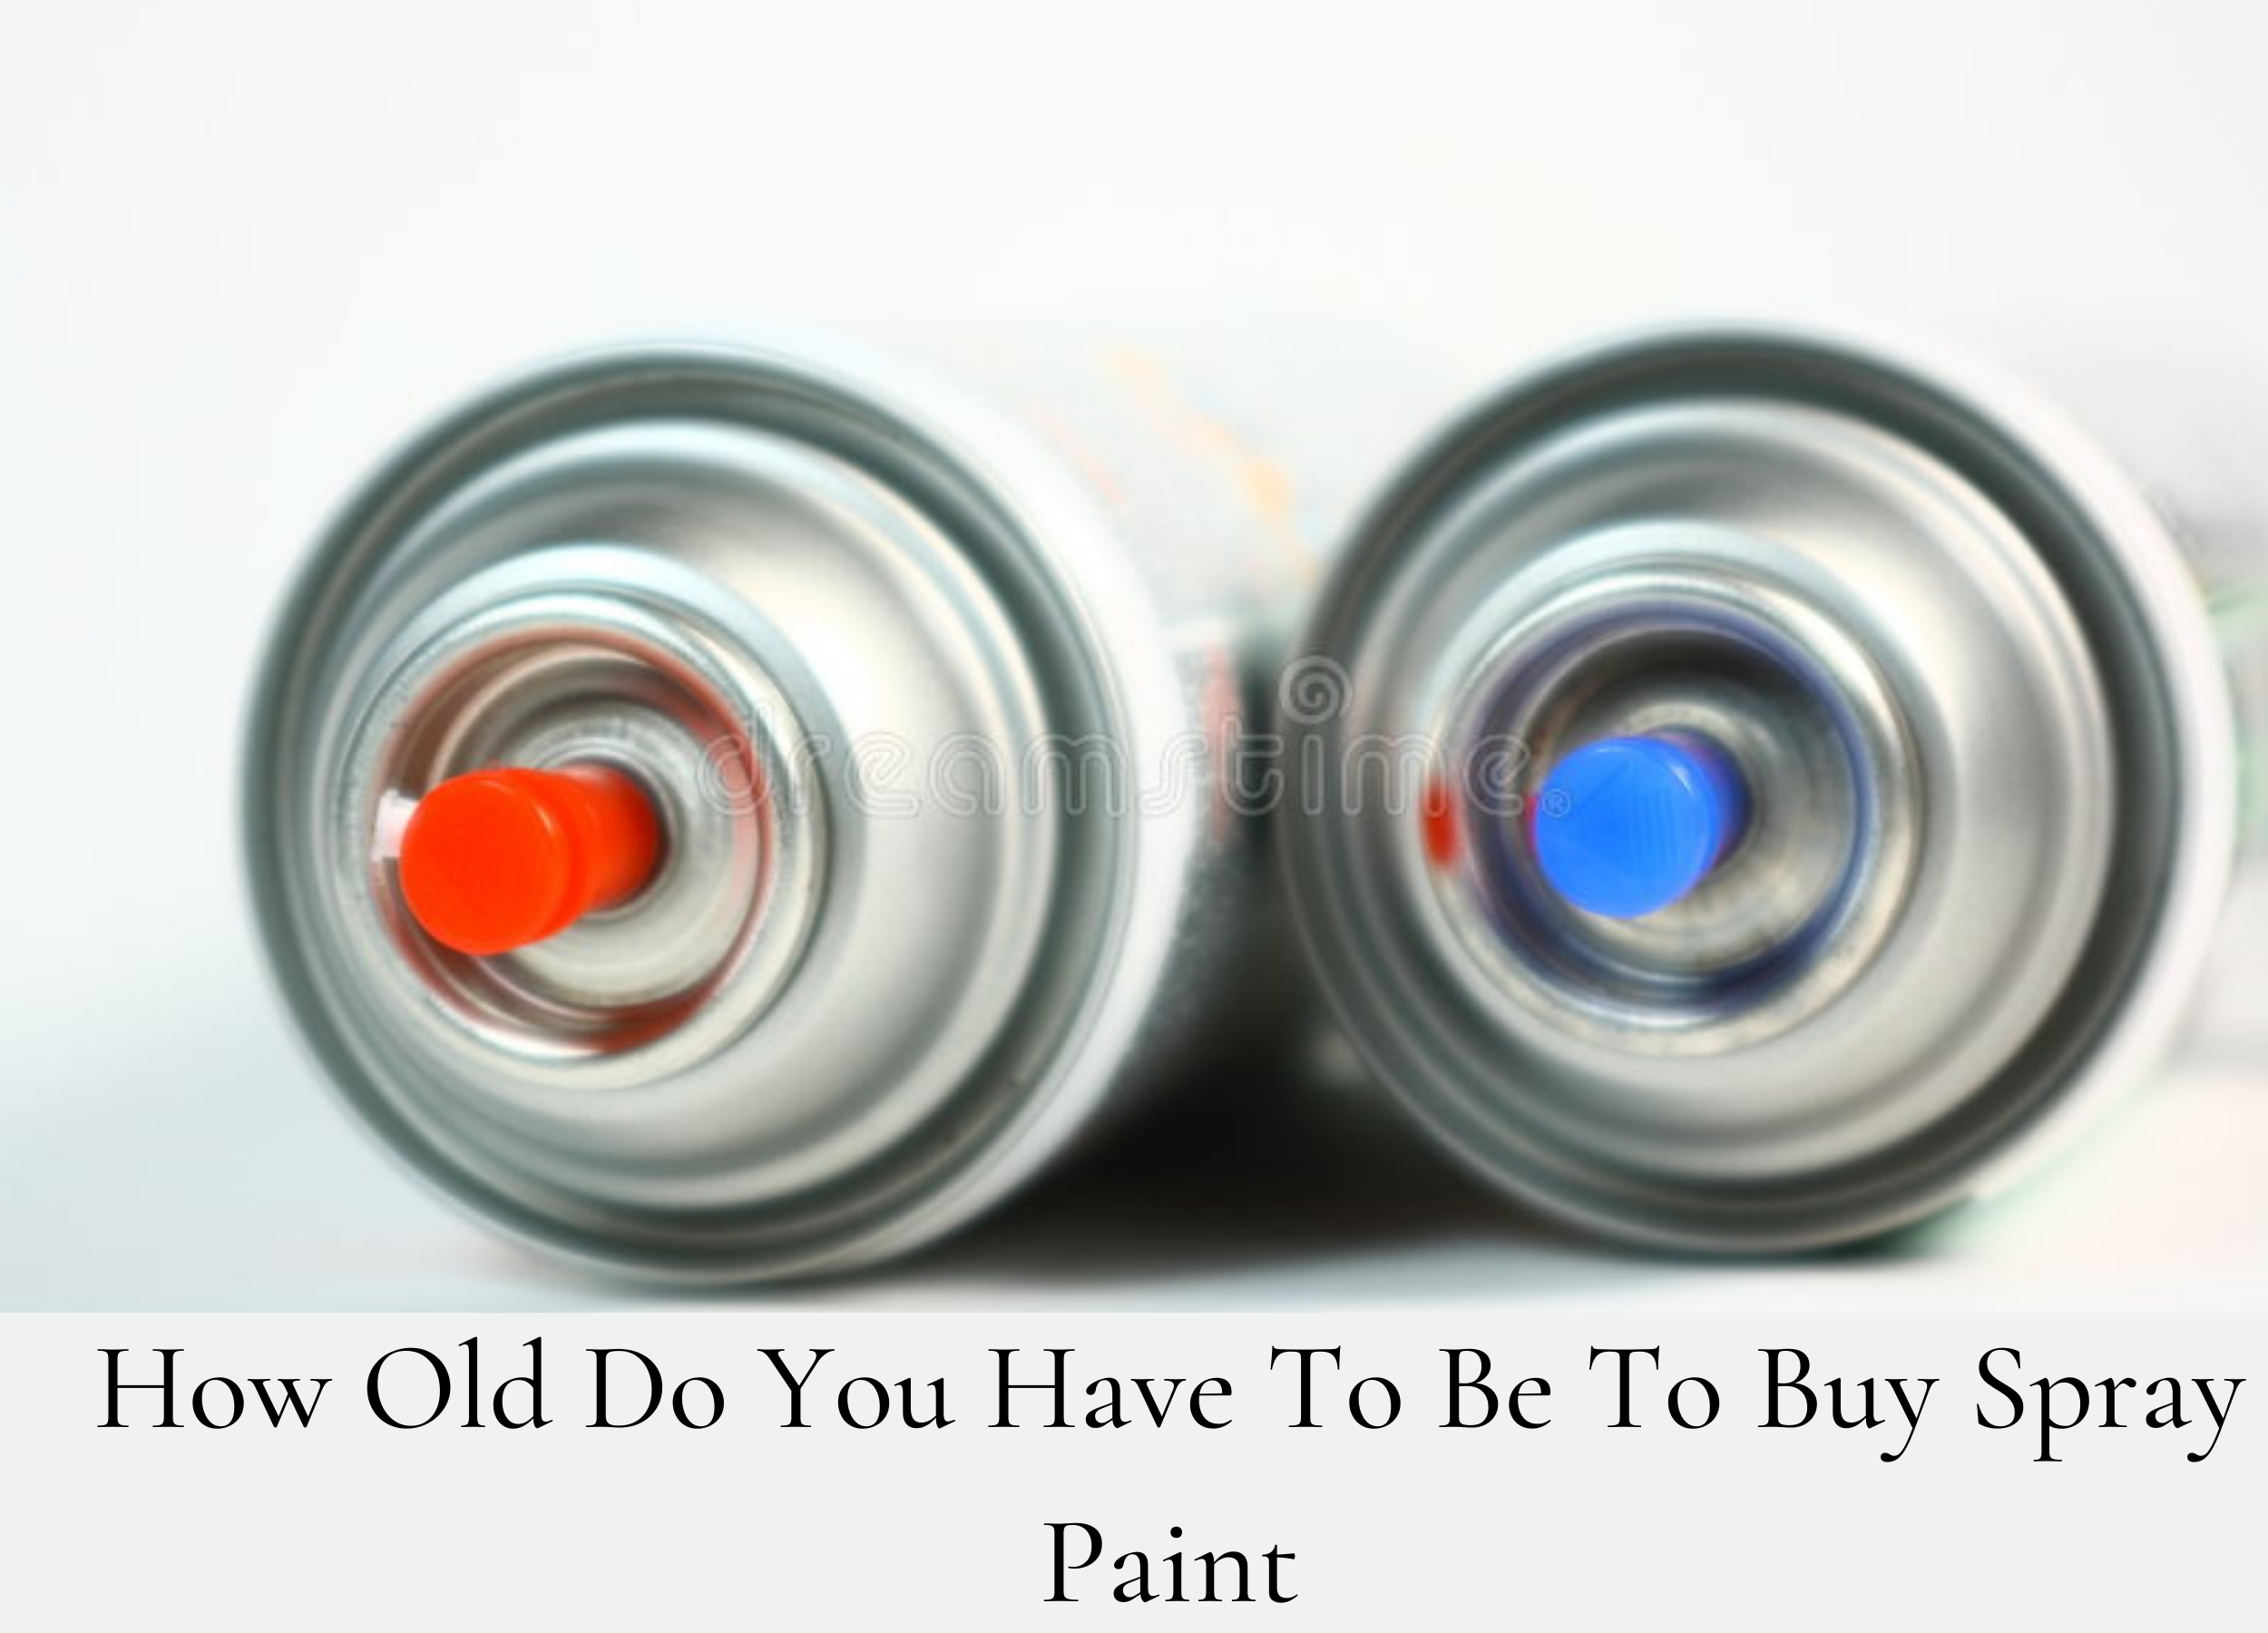 How Old Do You Have To Be To Buy Spray Paint